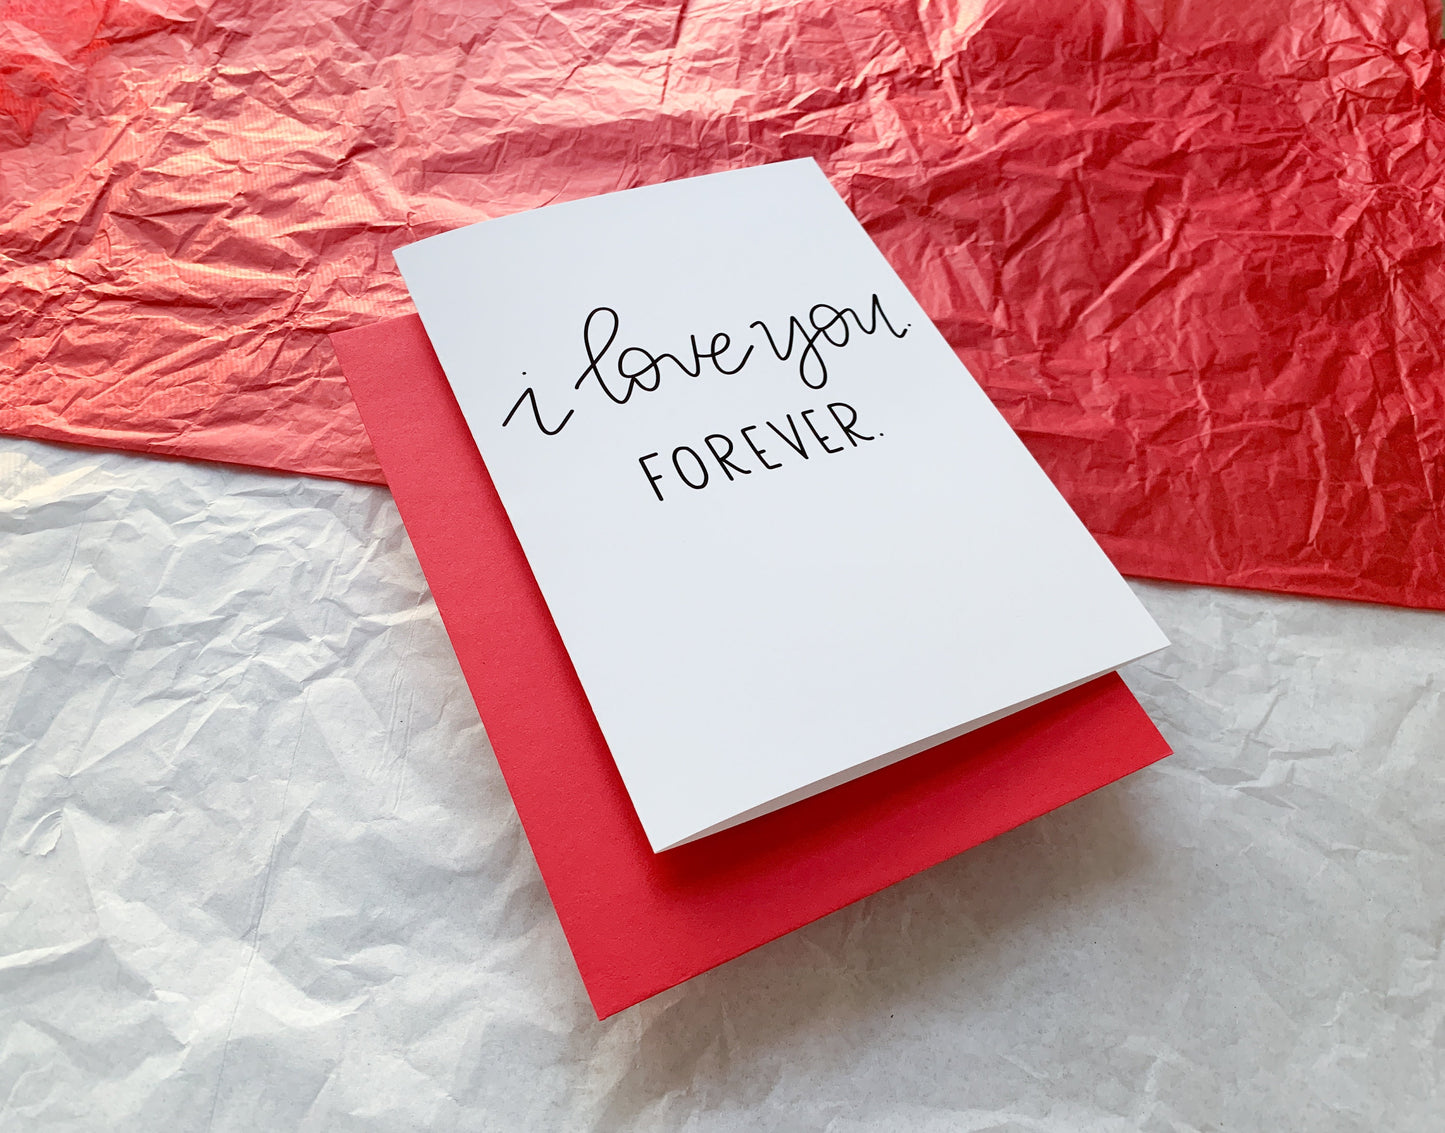 I Love You Forever Simple Handmade Valentine's Card by StoneDonut Design